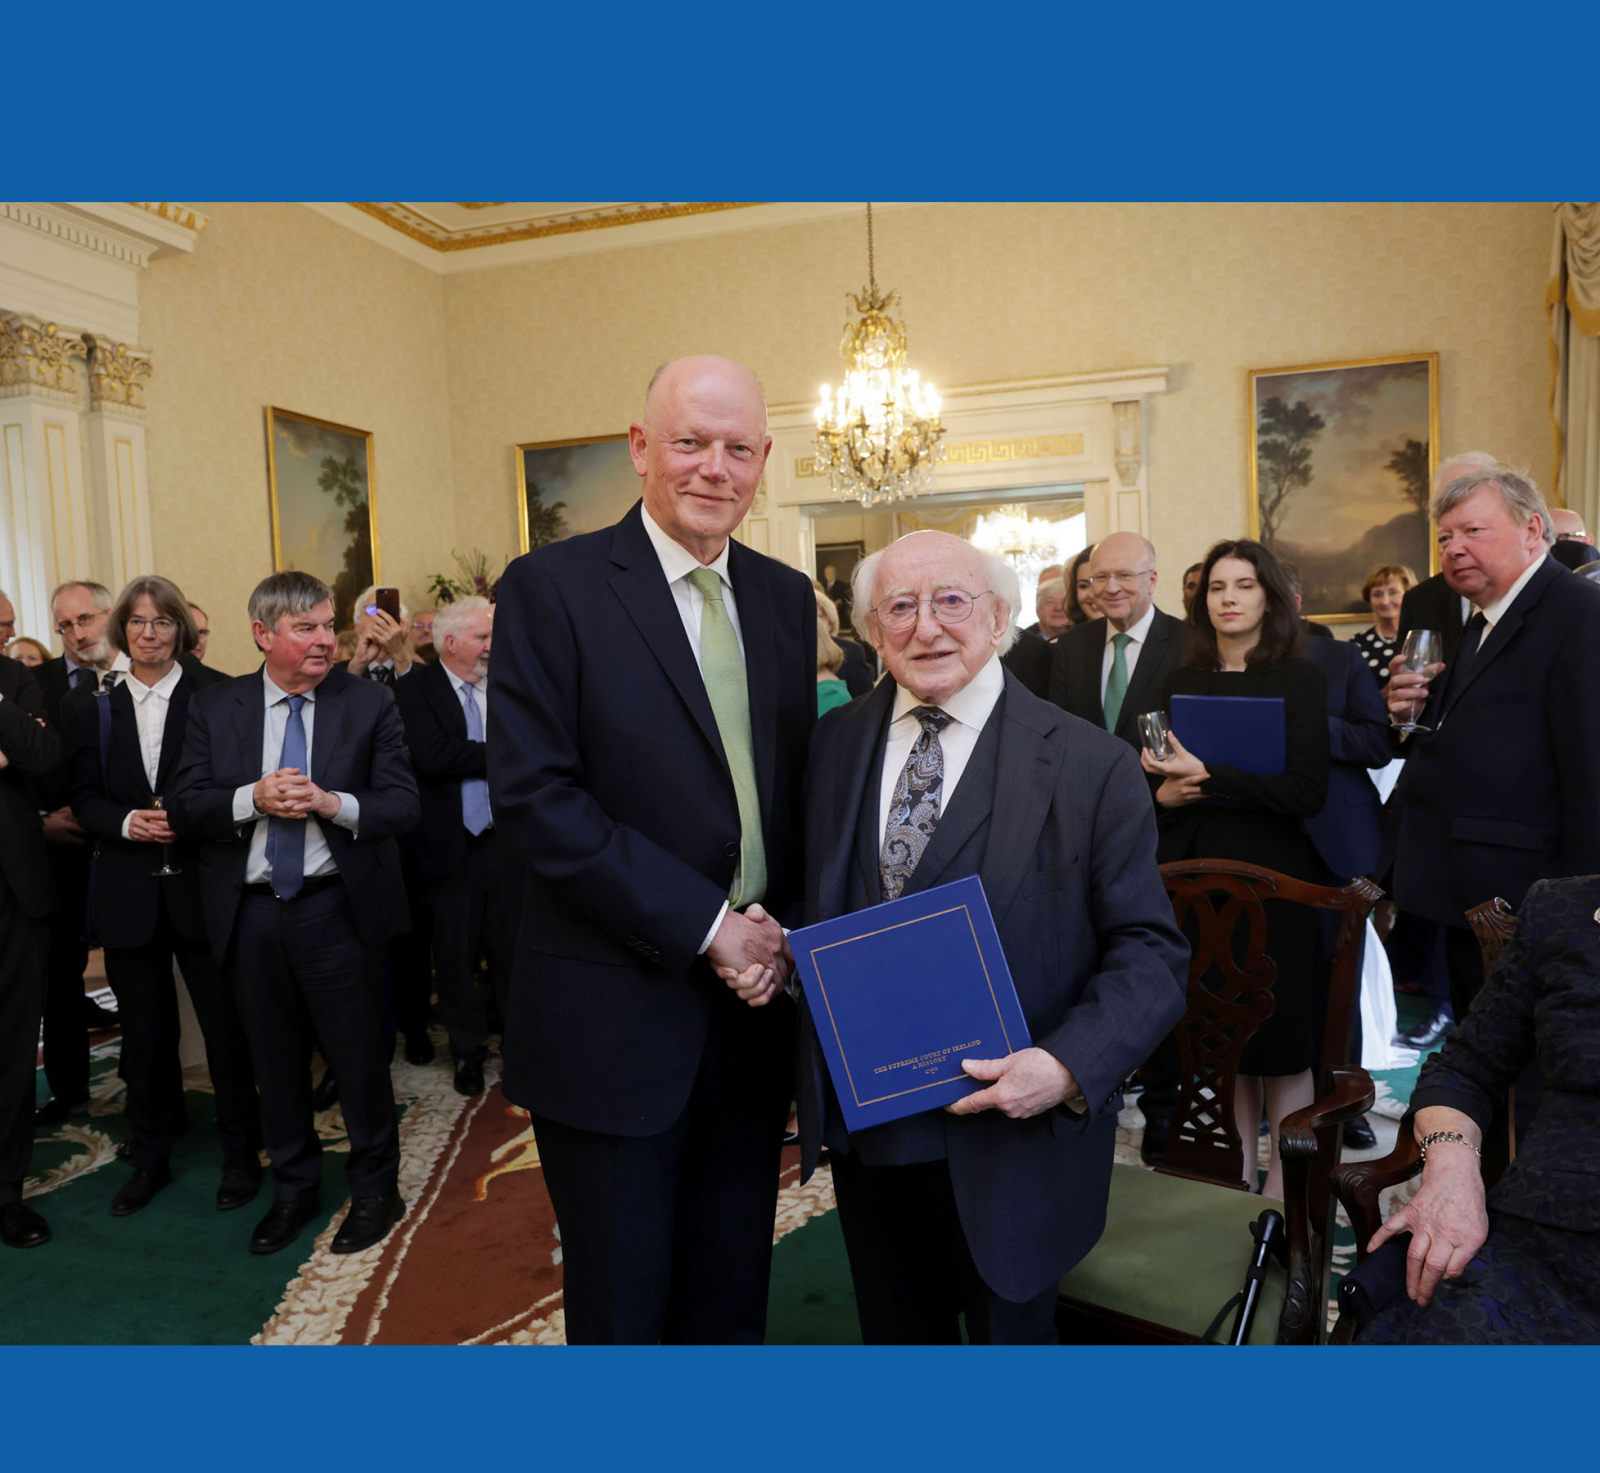 President marks the centenary of the Irish Courts system